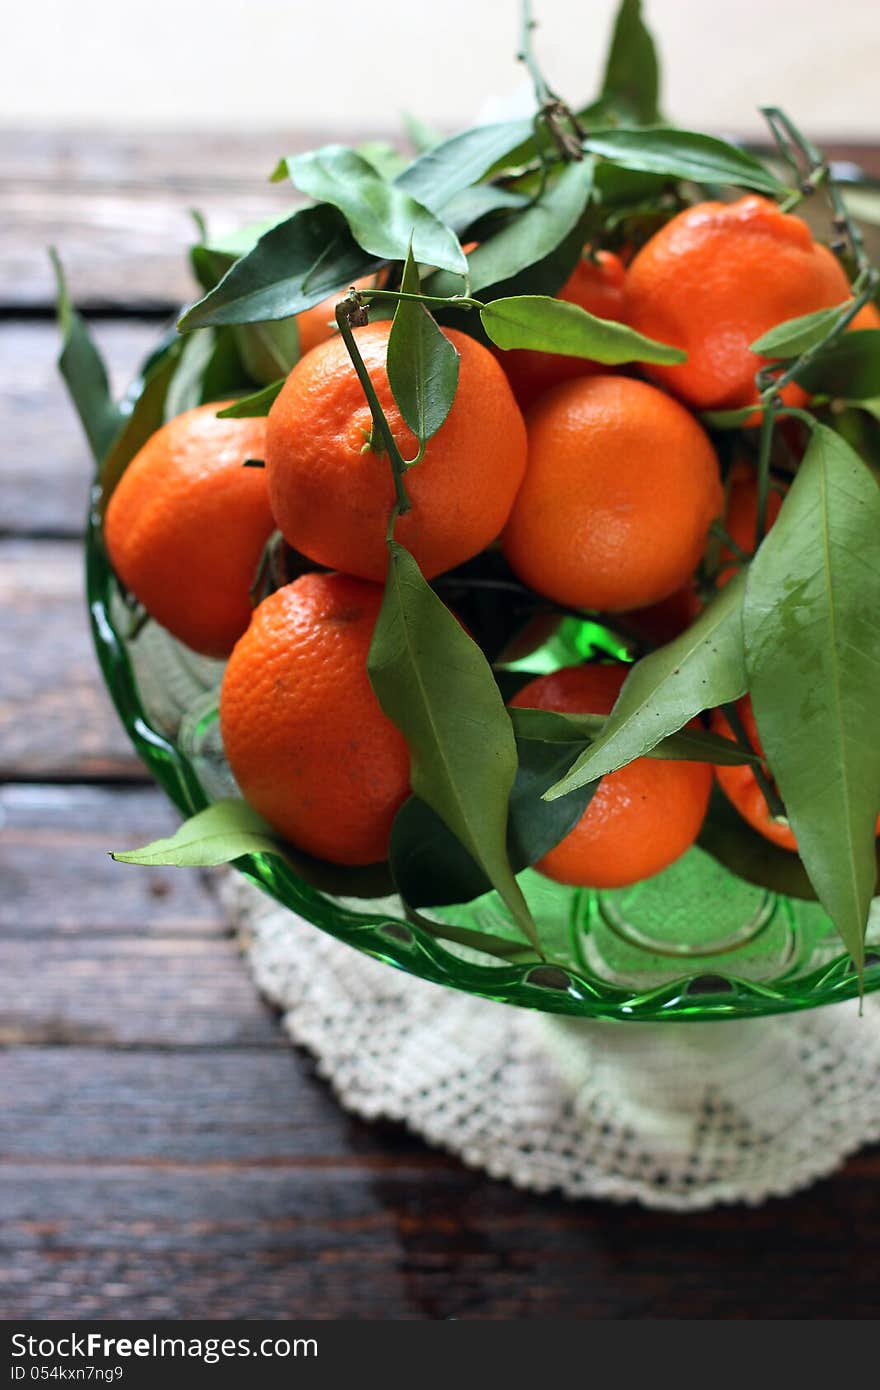 Bowl of fresh mandarins with leaves and branches. Bowl of fresh mandarins with leaves and branches